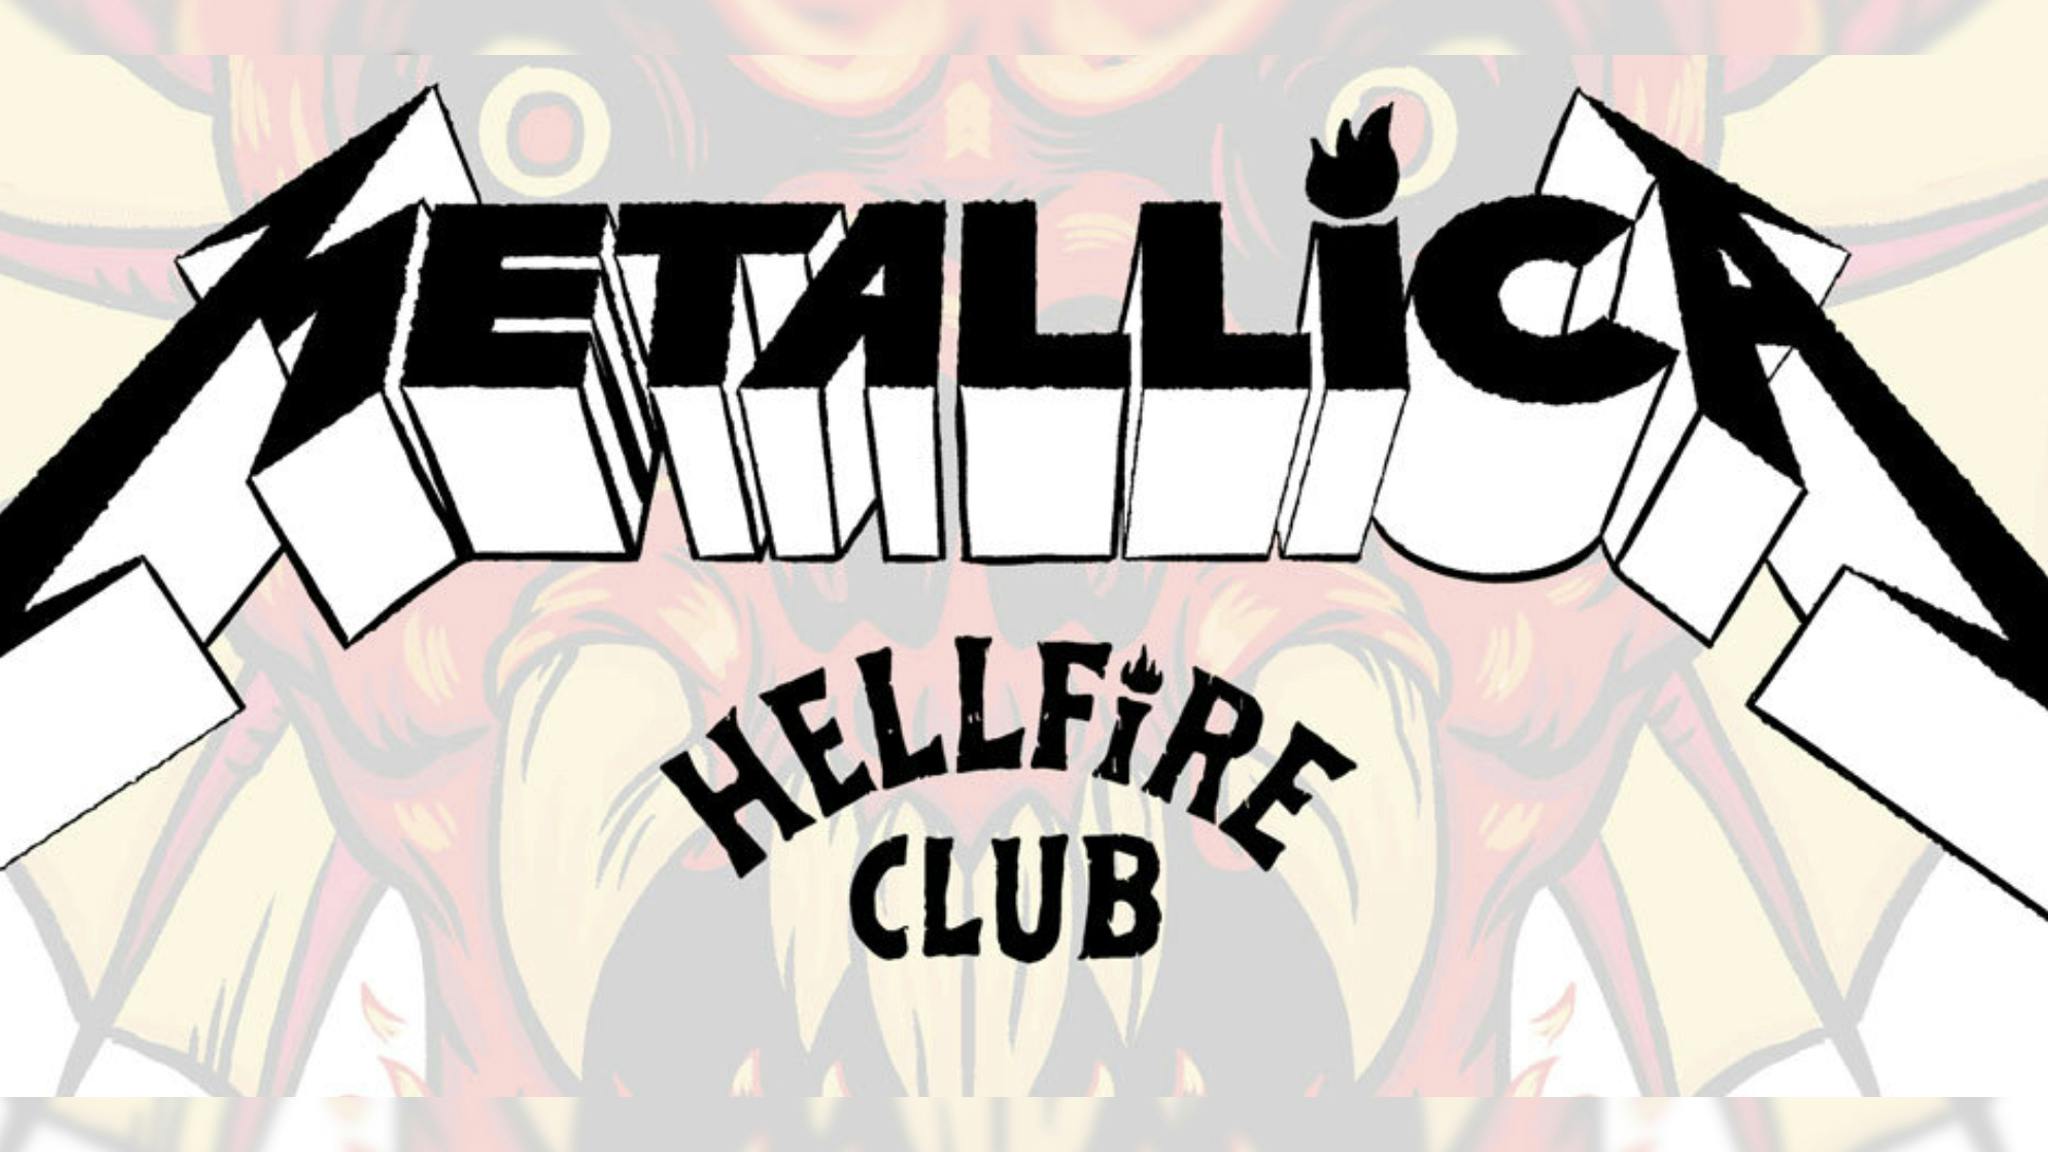 Metallica launch official Hellfire Club merch with Stranger Things